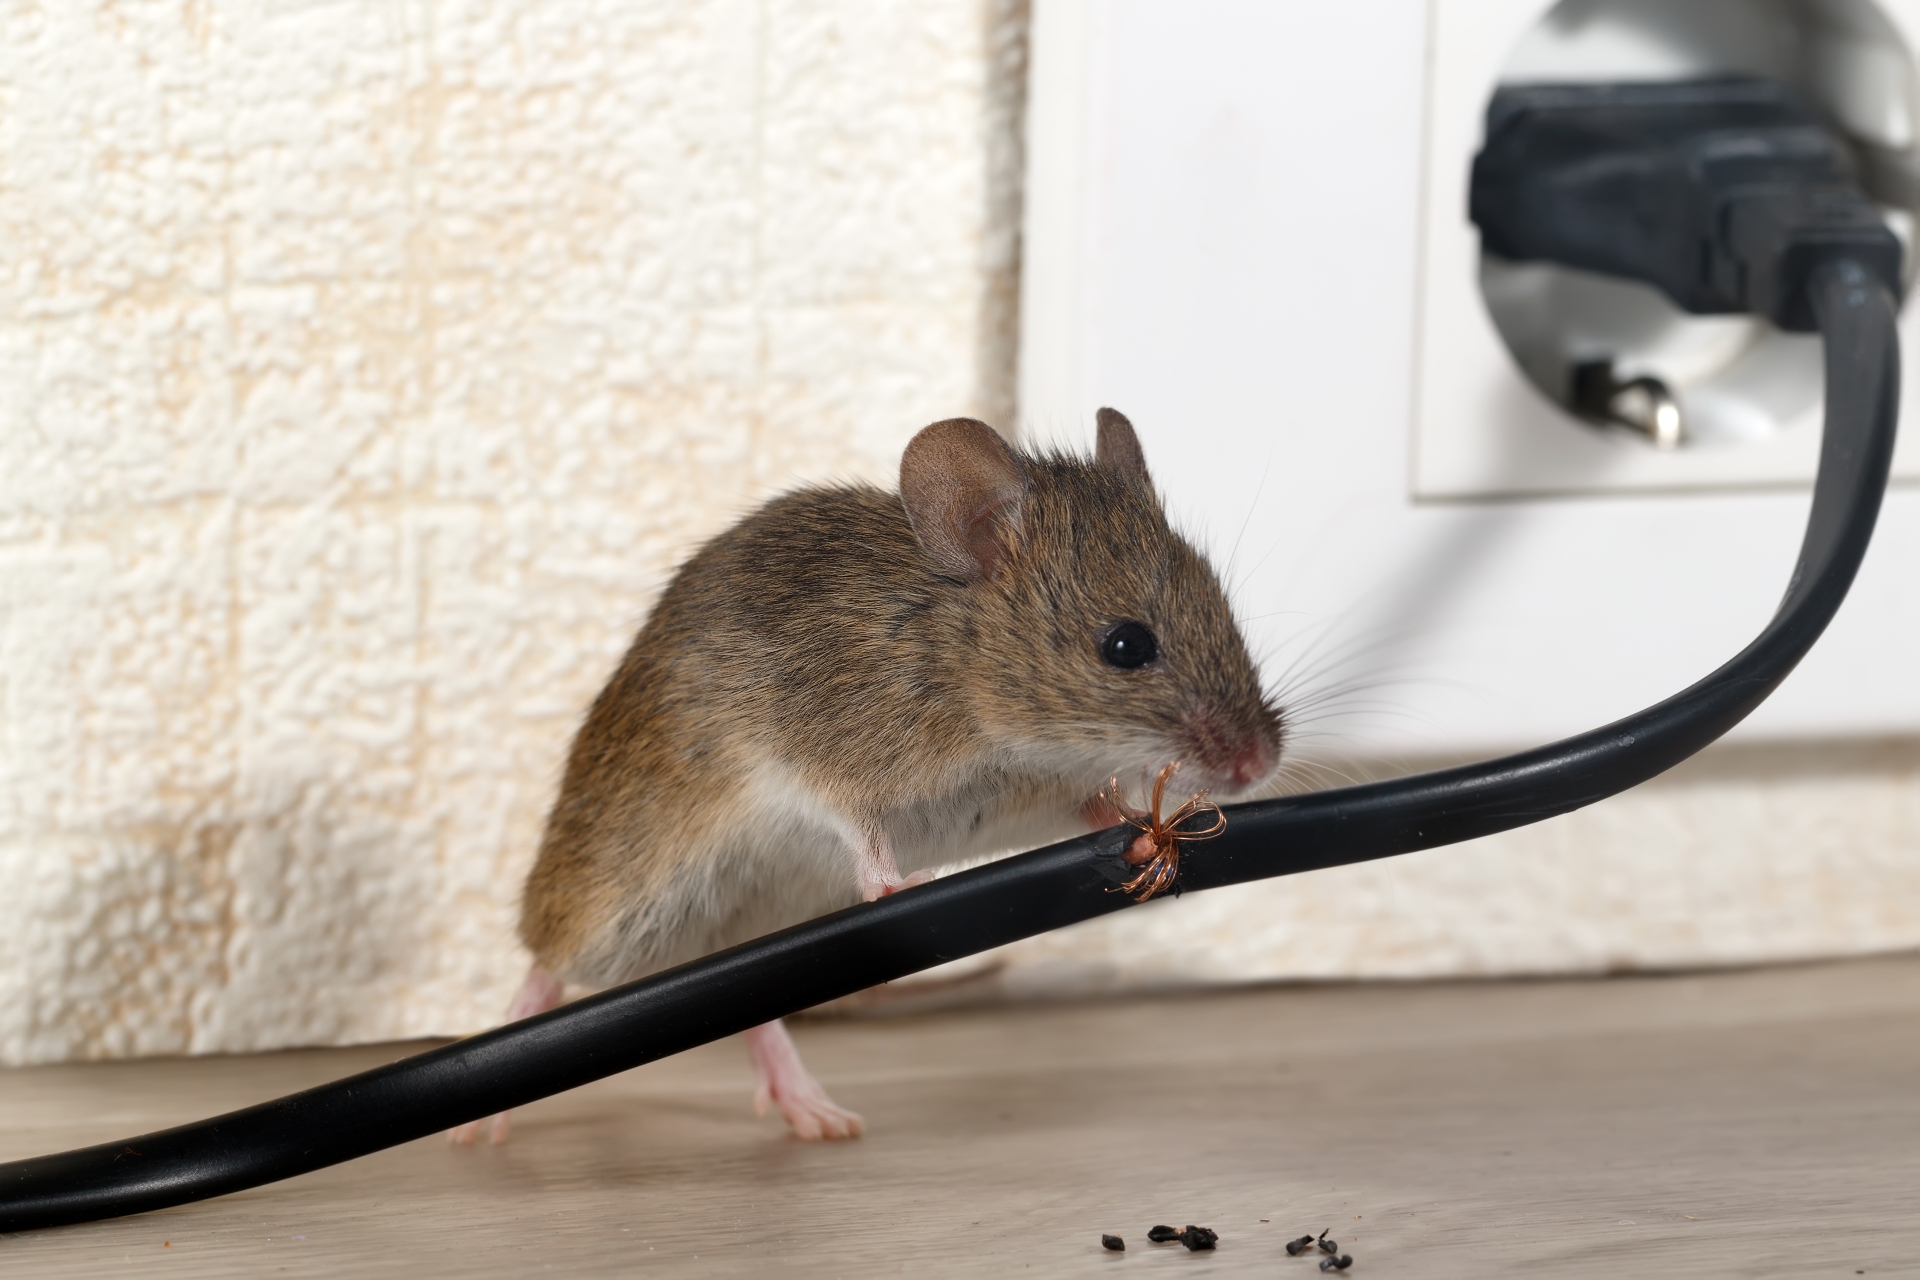 Mice Infestation, Pest Control in Stockwell, SW9. Call Now 020 8166 9746